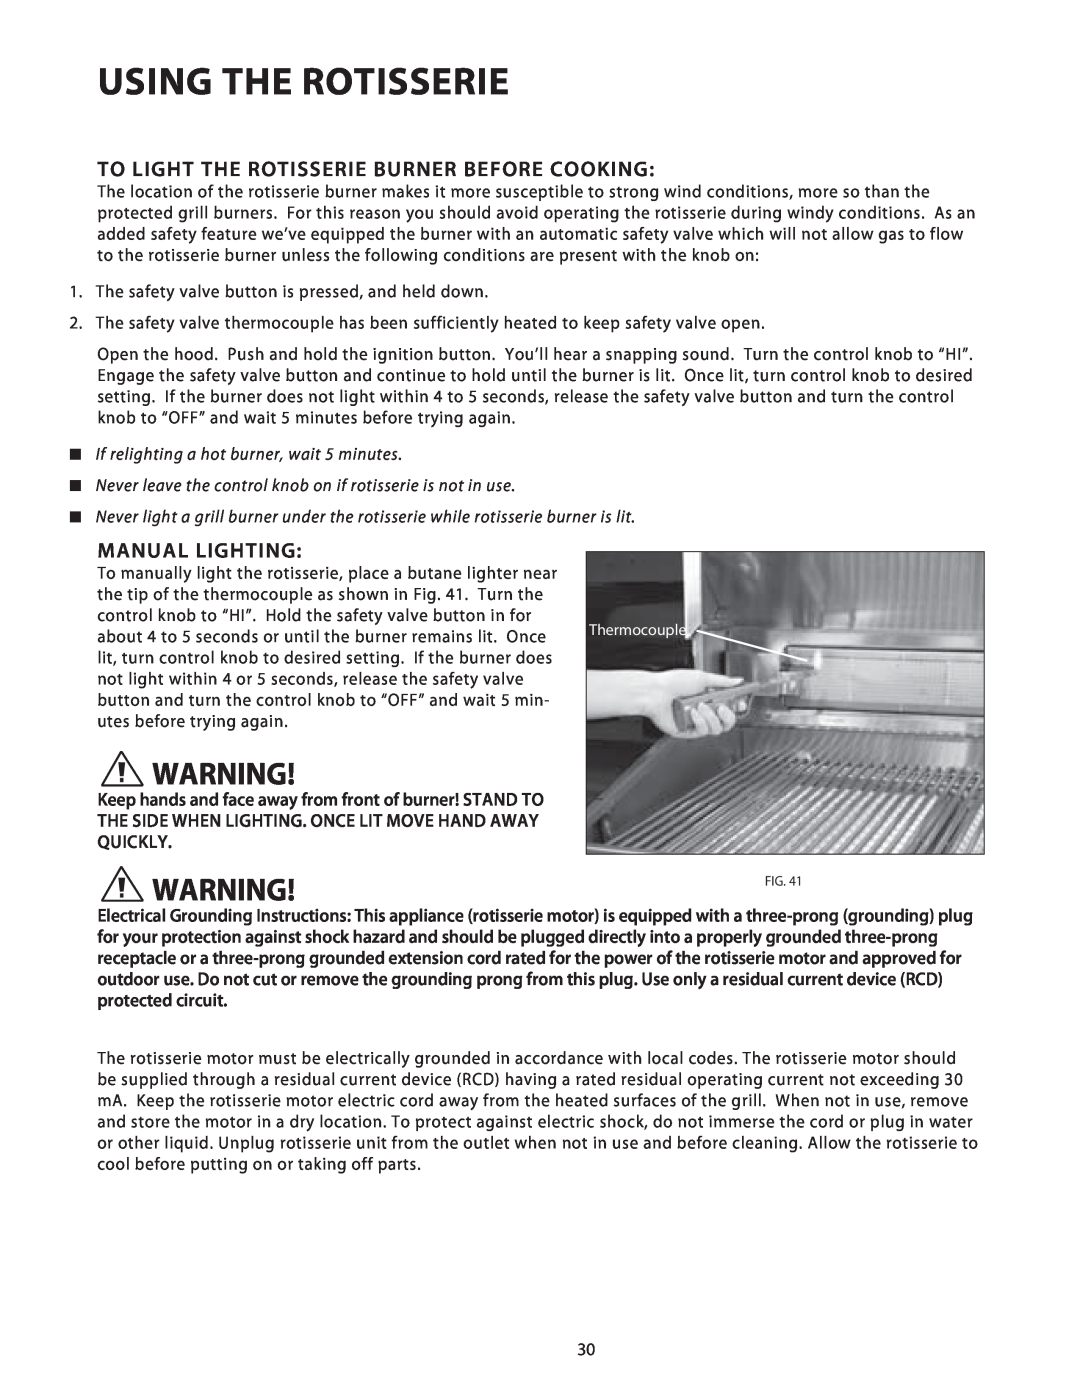 Fisher & Paykel BGB36 Warning!Fig, To Light The Rotisserie Burner Before Cooking, Manual Lighting, Using The Rotisserie 